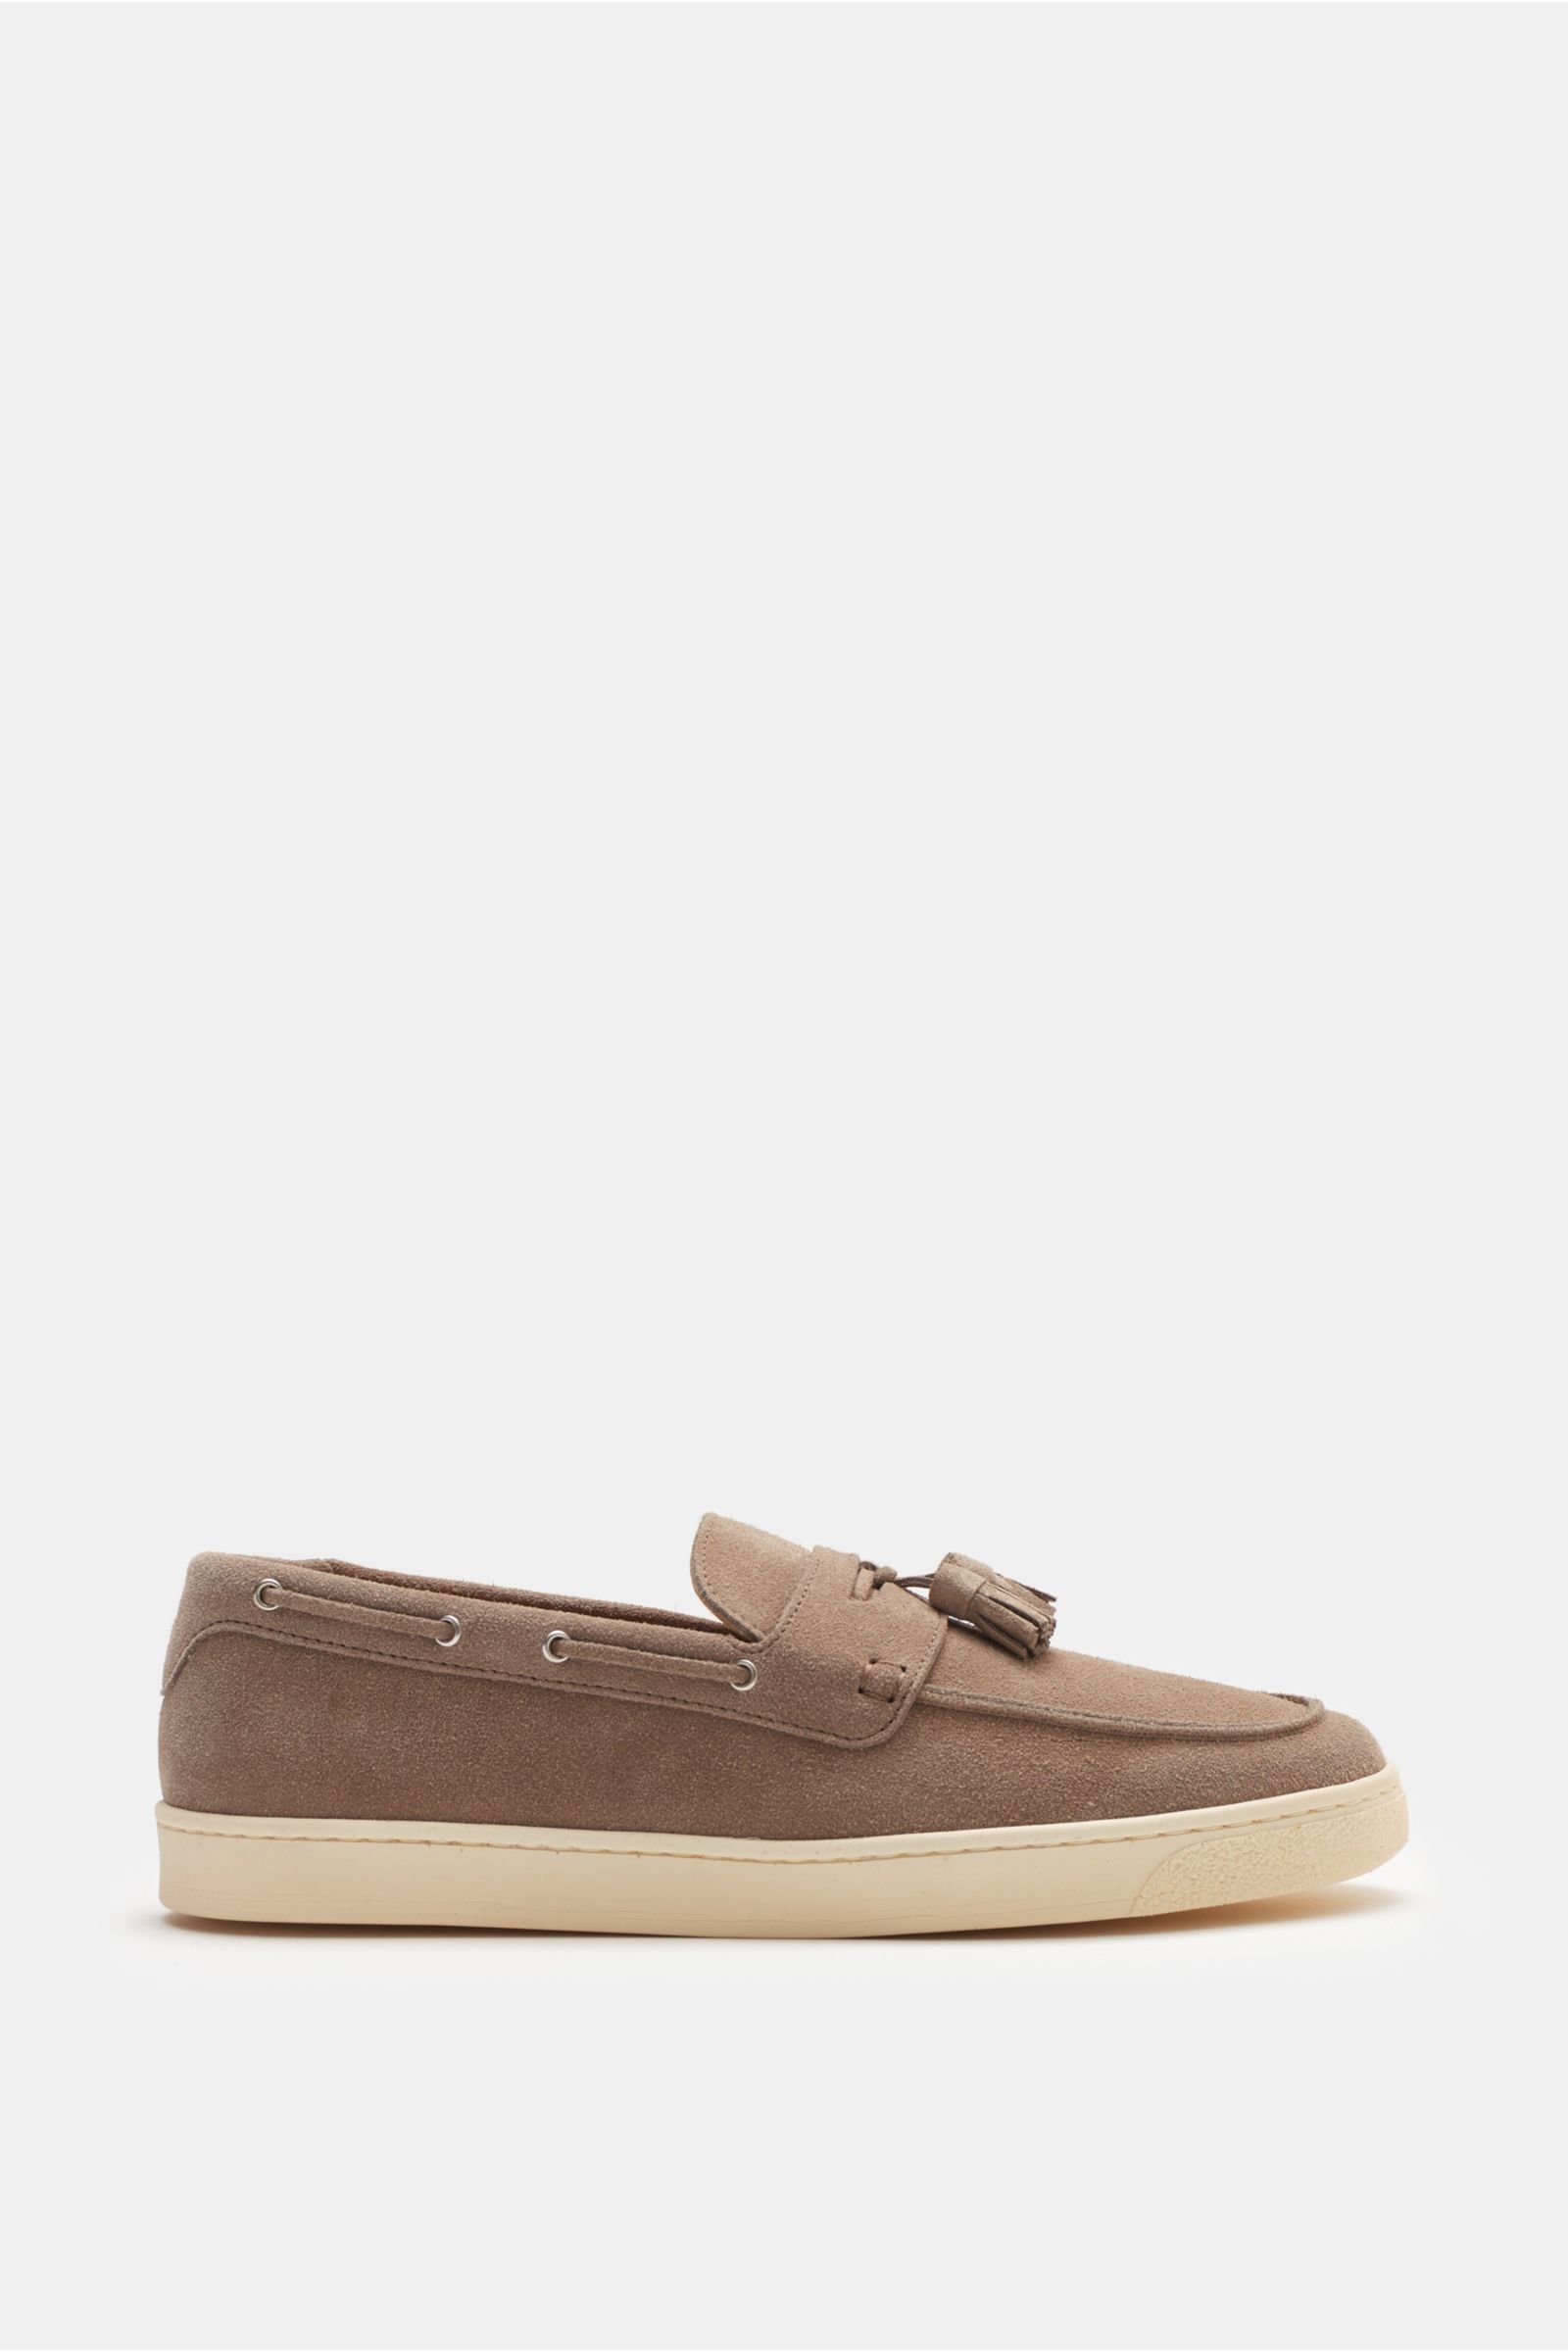 Boat shoes grey brown